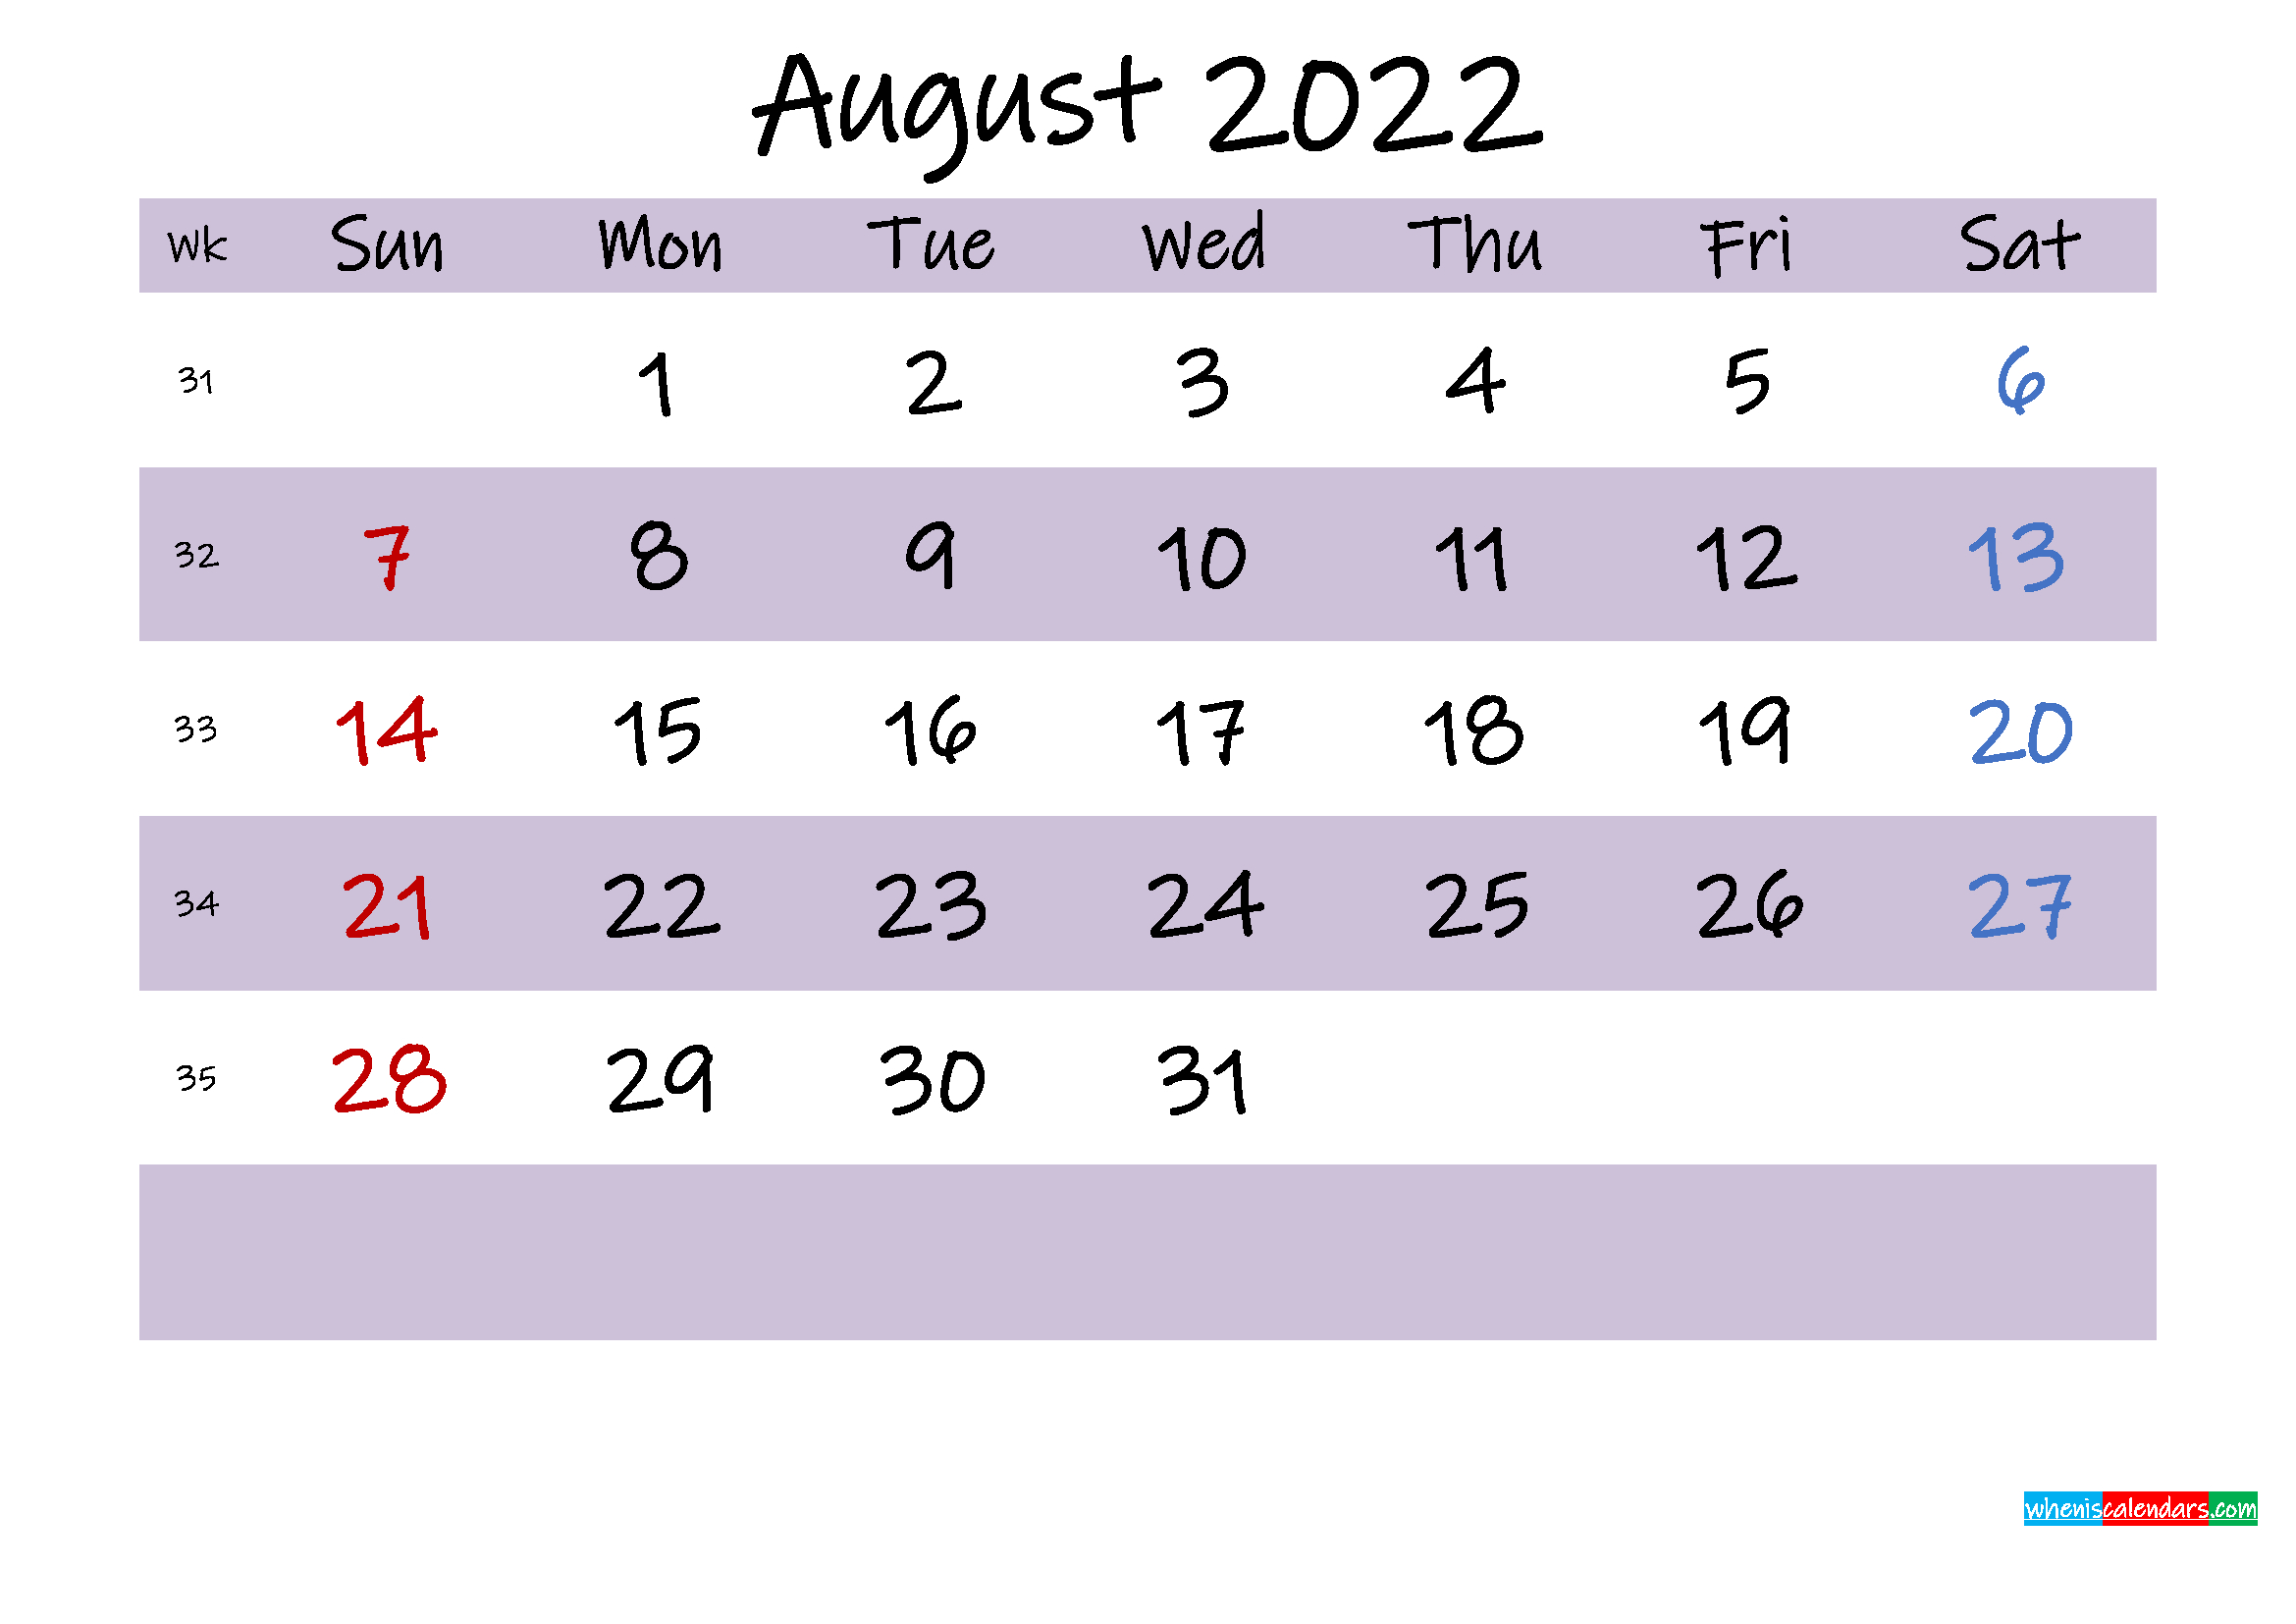 August 2022 Calendar With Holidays Printable - Template No